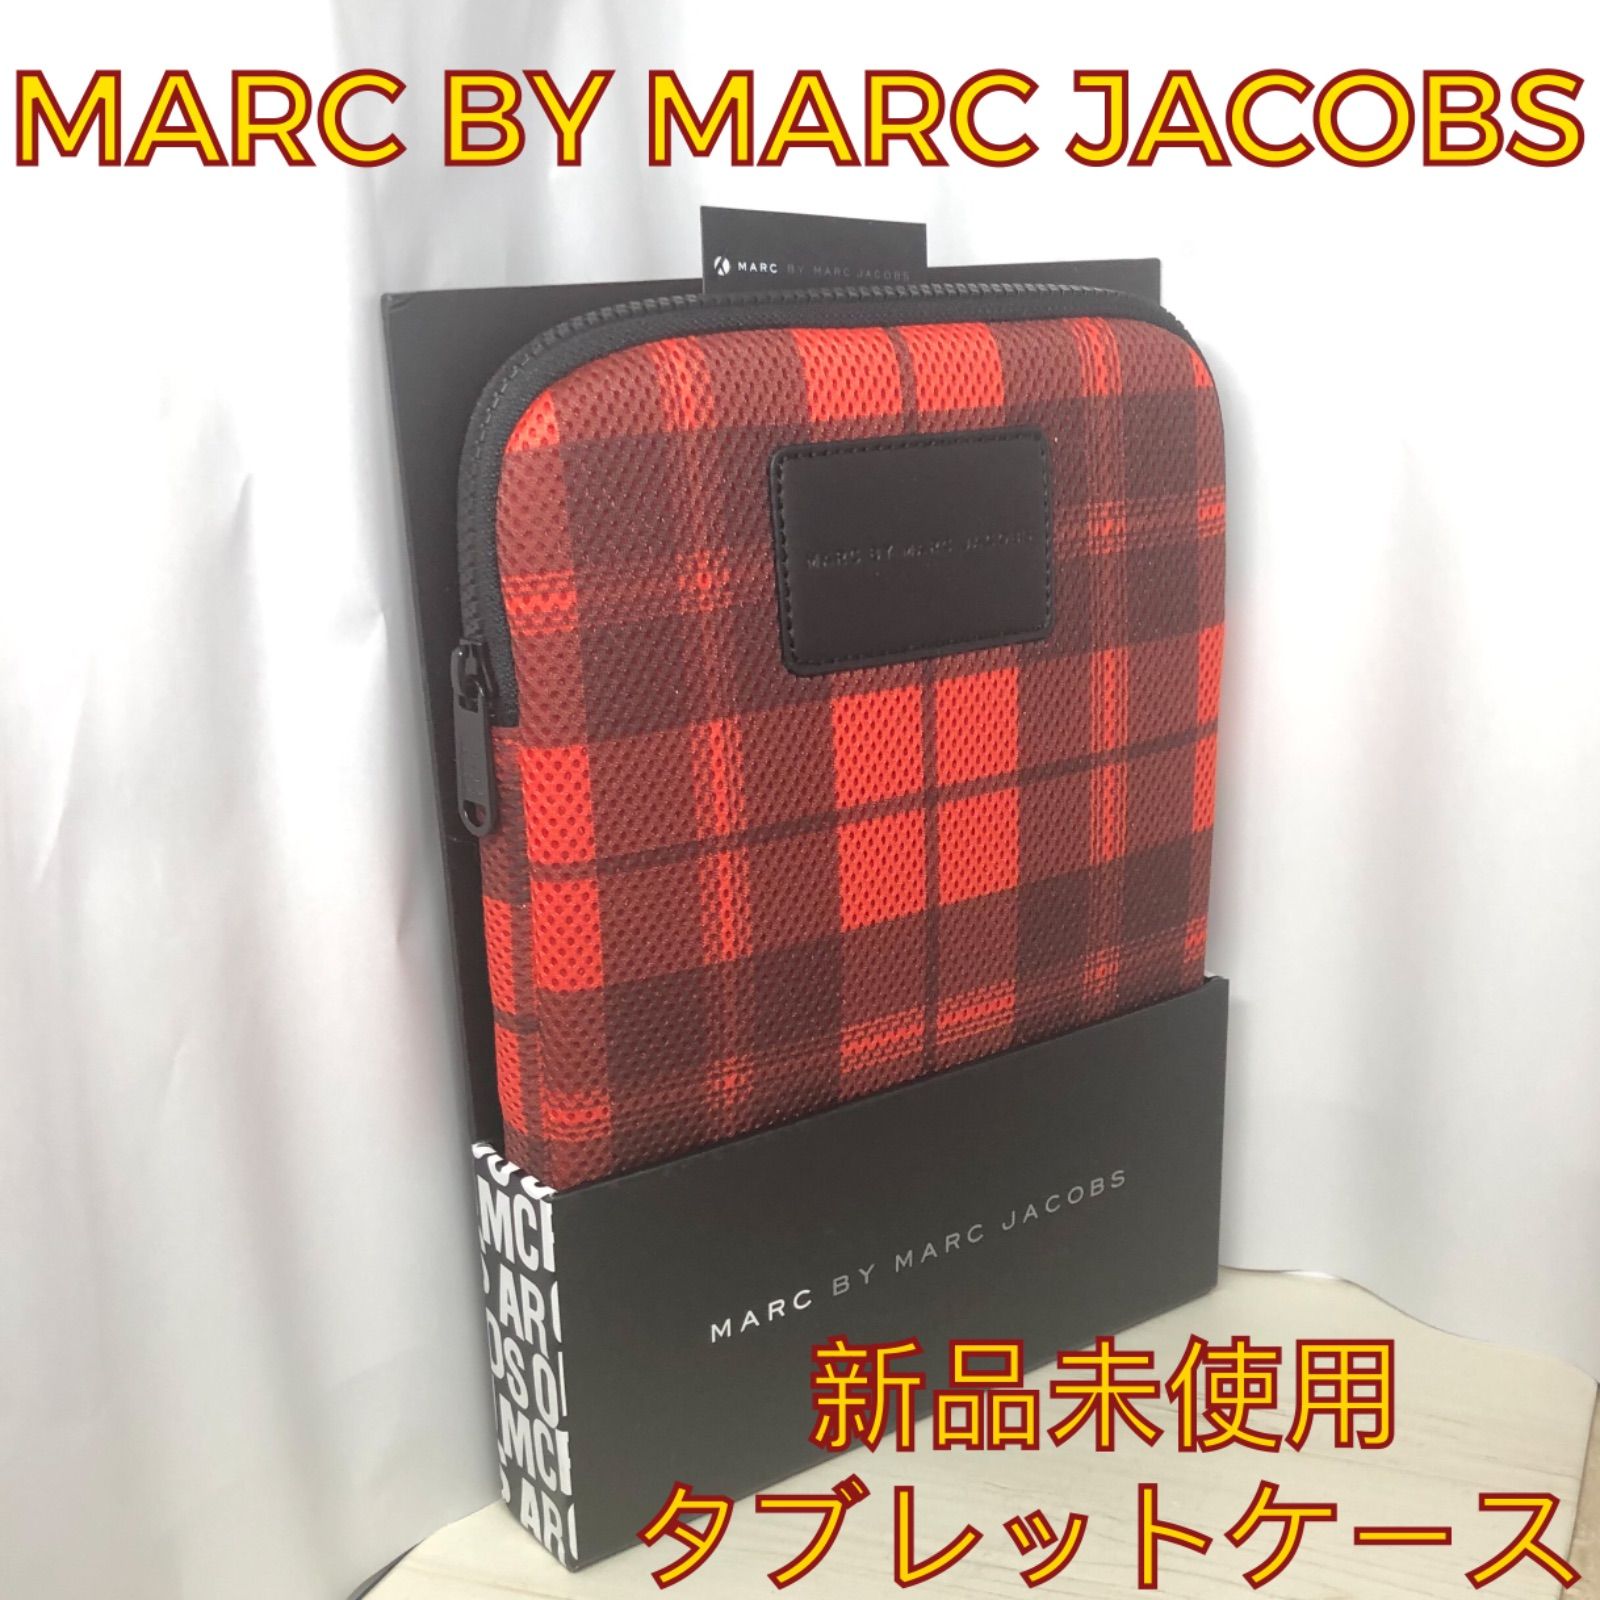 Marc by Marc Jacobs タブレットケース - モバイルケース